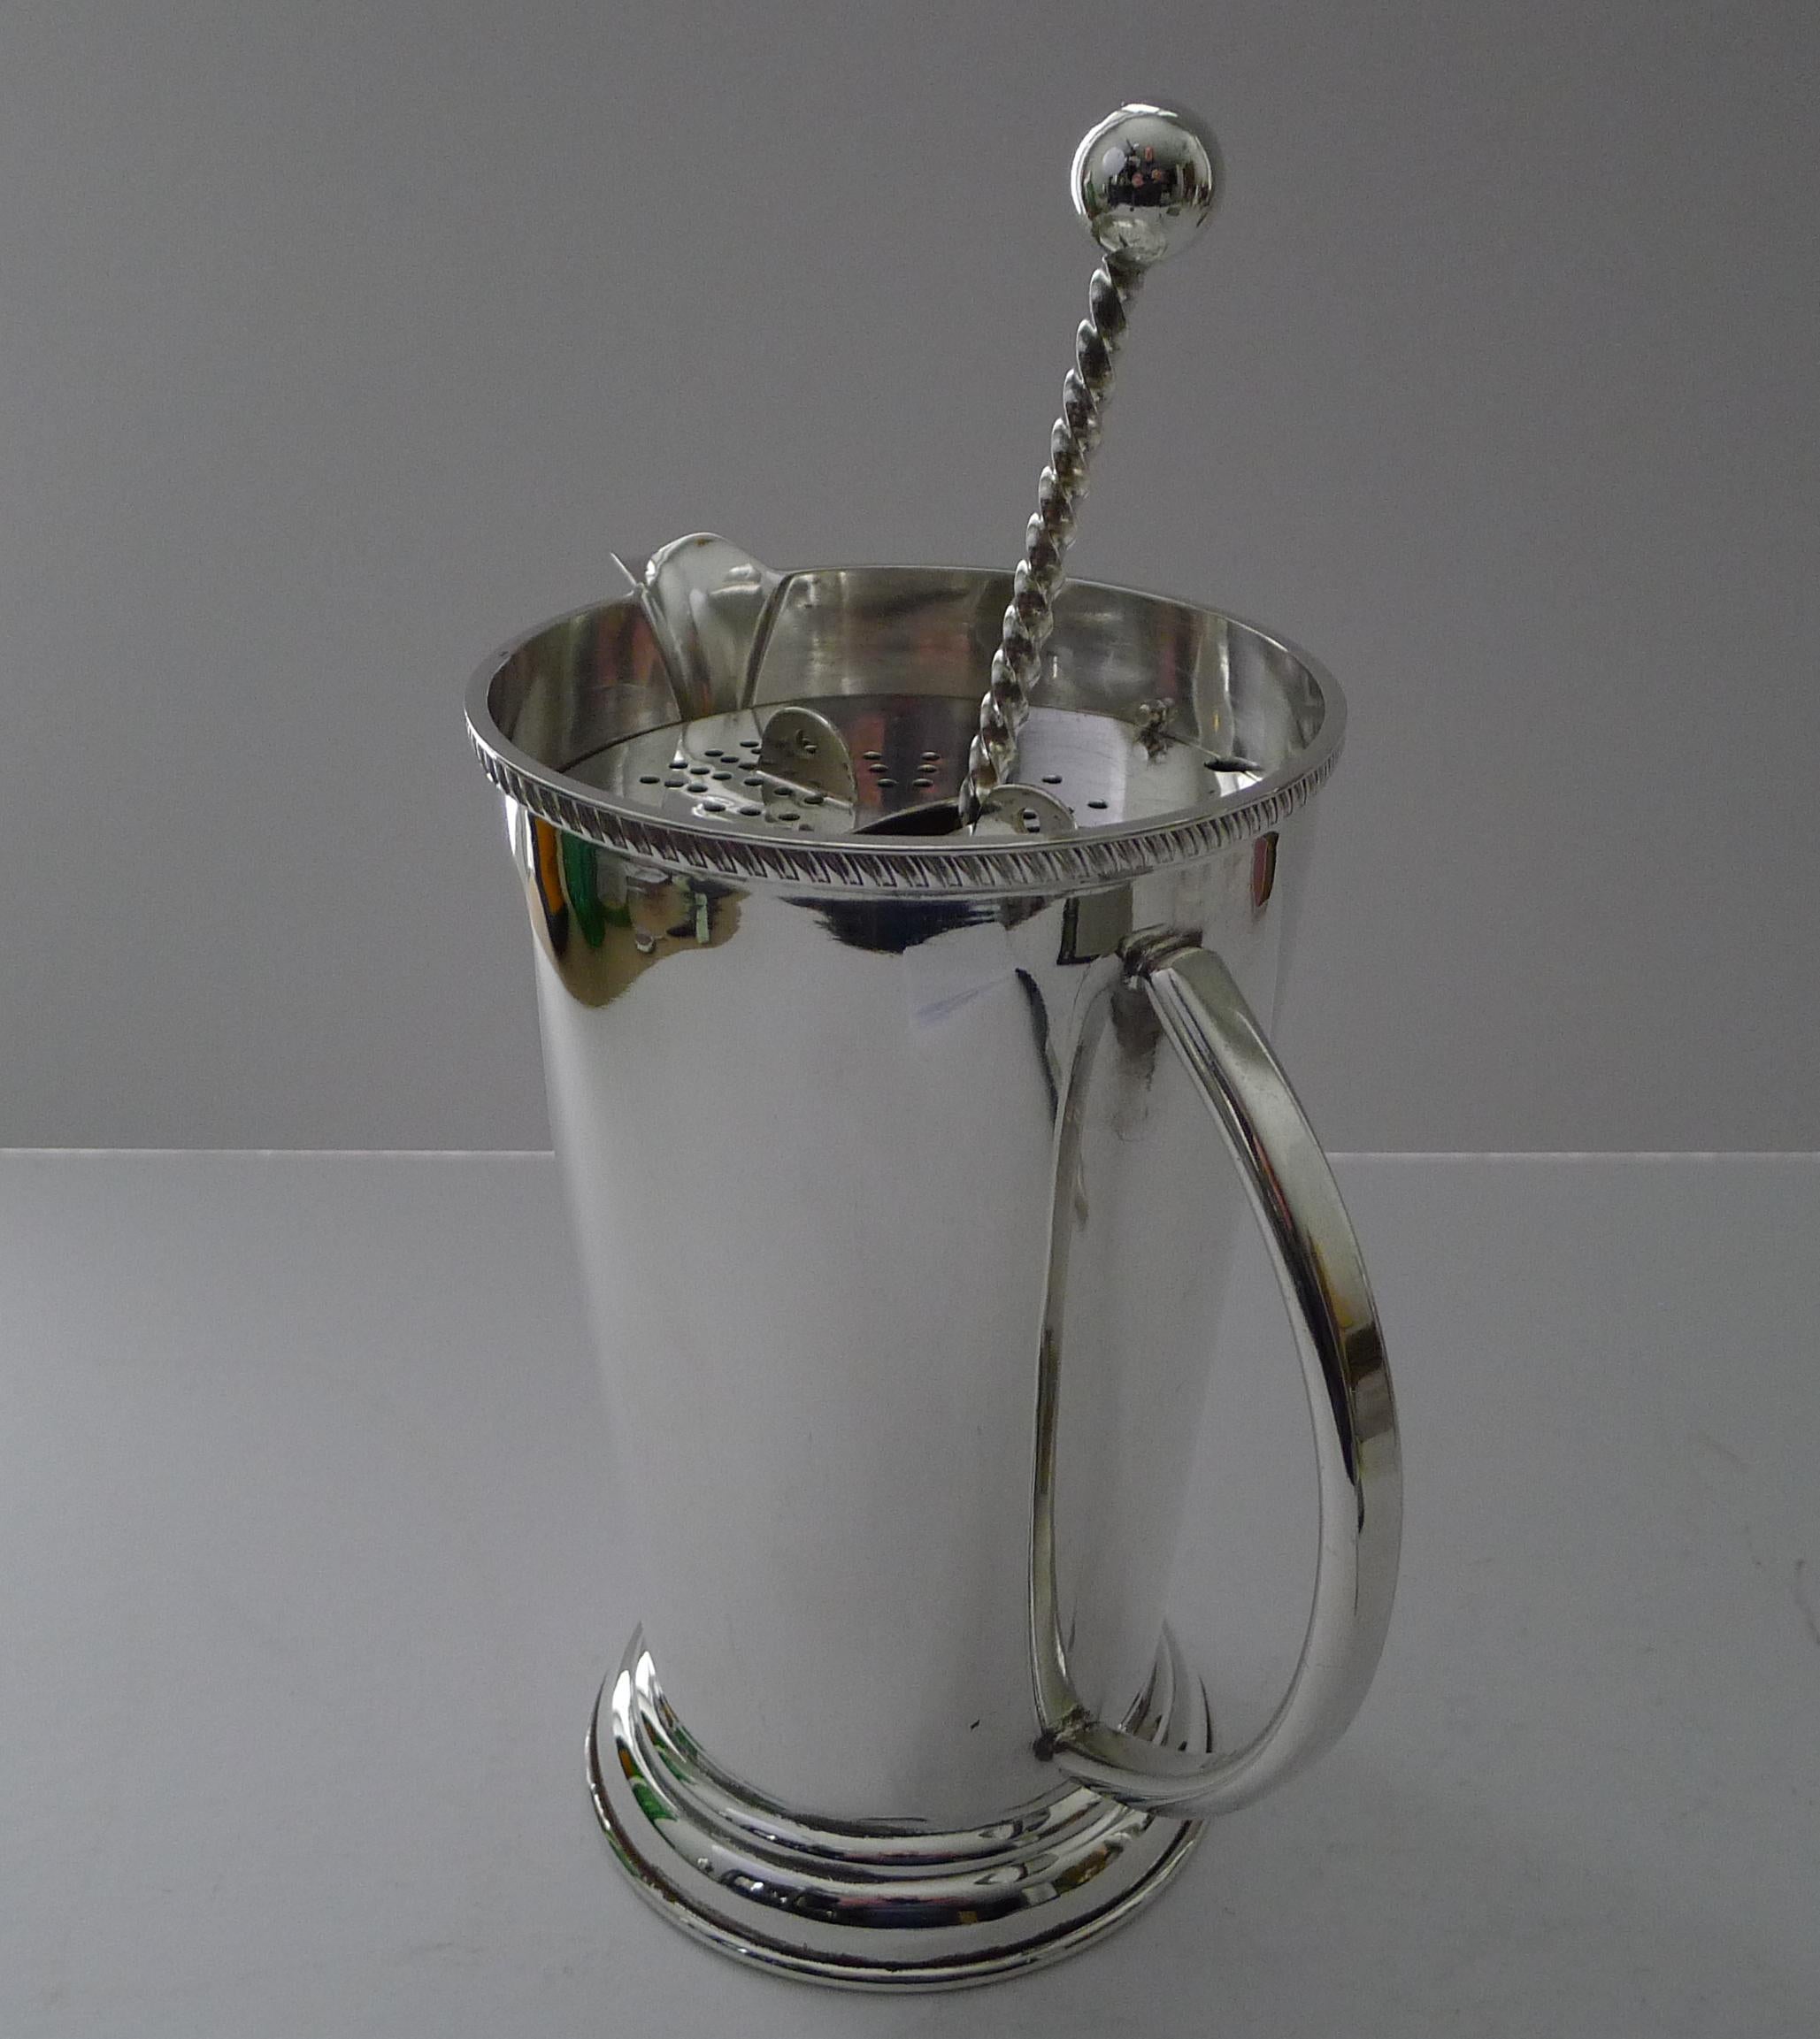 A magnificent vintage cocktail or Martini mixer by the well renowned, P H Vogel & Co. of Birmingham.

The jug has a removable strainer which fixes into the top of the jug and the two mounts are used to twist and open this strainer; these also act as